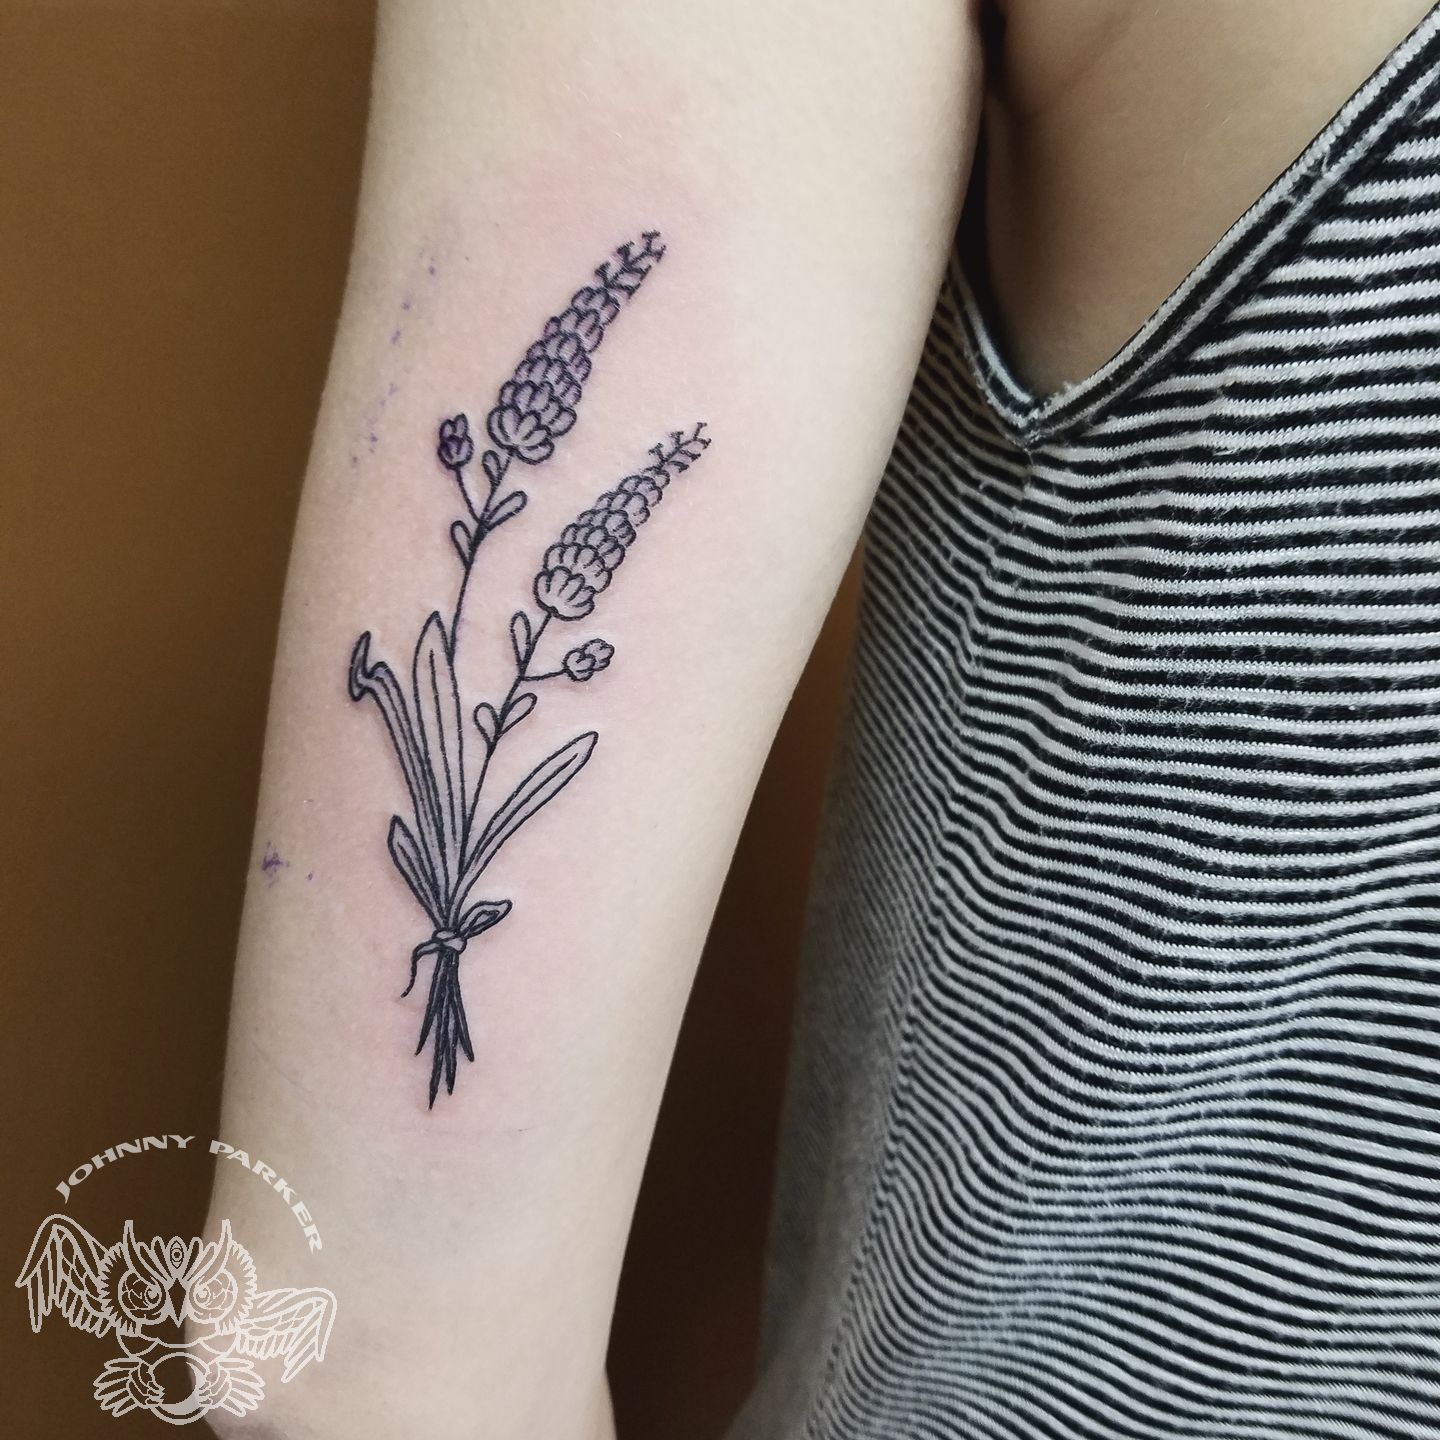 Emerald Tattoo Company UK on Twitter Lavender sprigs done by  rebeccytattoos last week from her flash emeraldtattoocompany  emeraldtattoo talbotgreen cardiff southwales floraltattoo  lavendertattoo lavender colourtattoo linework dotwork 